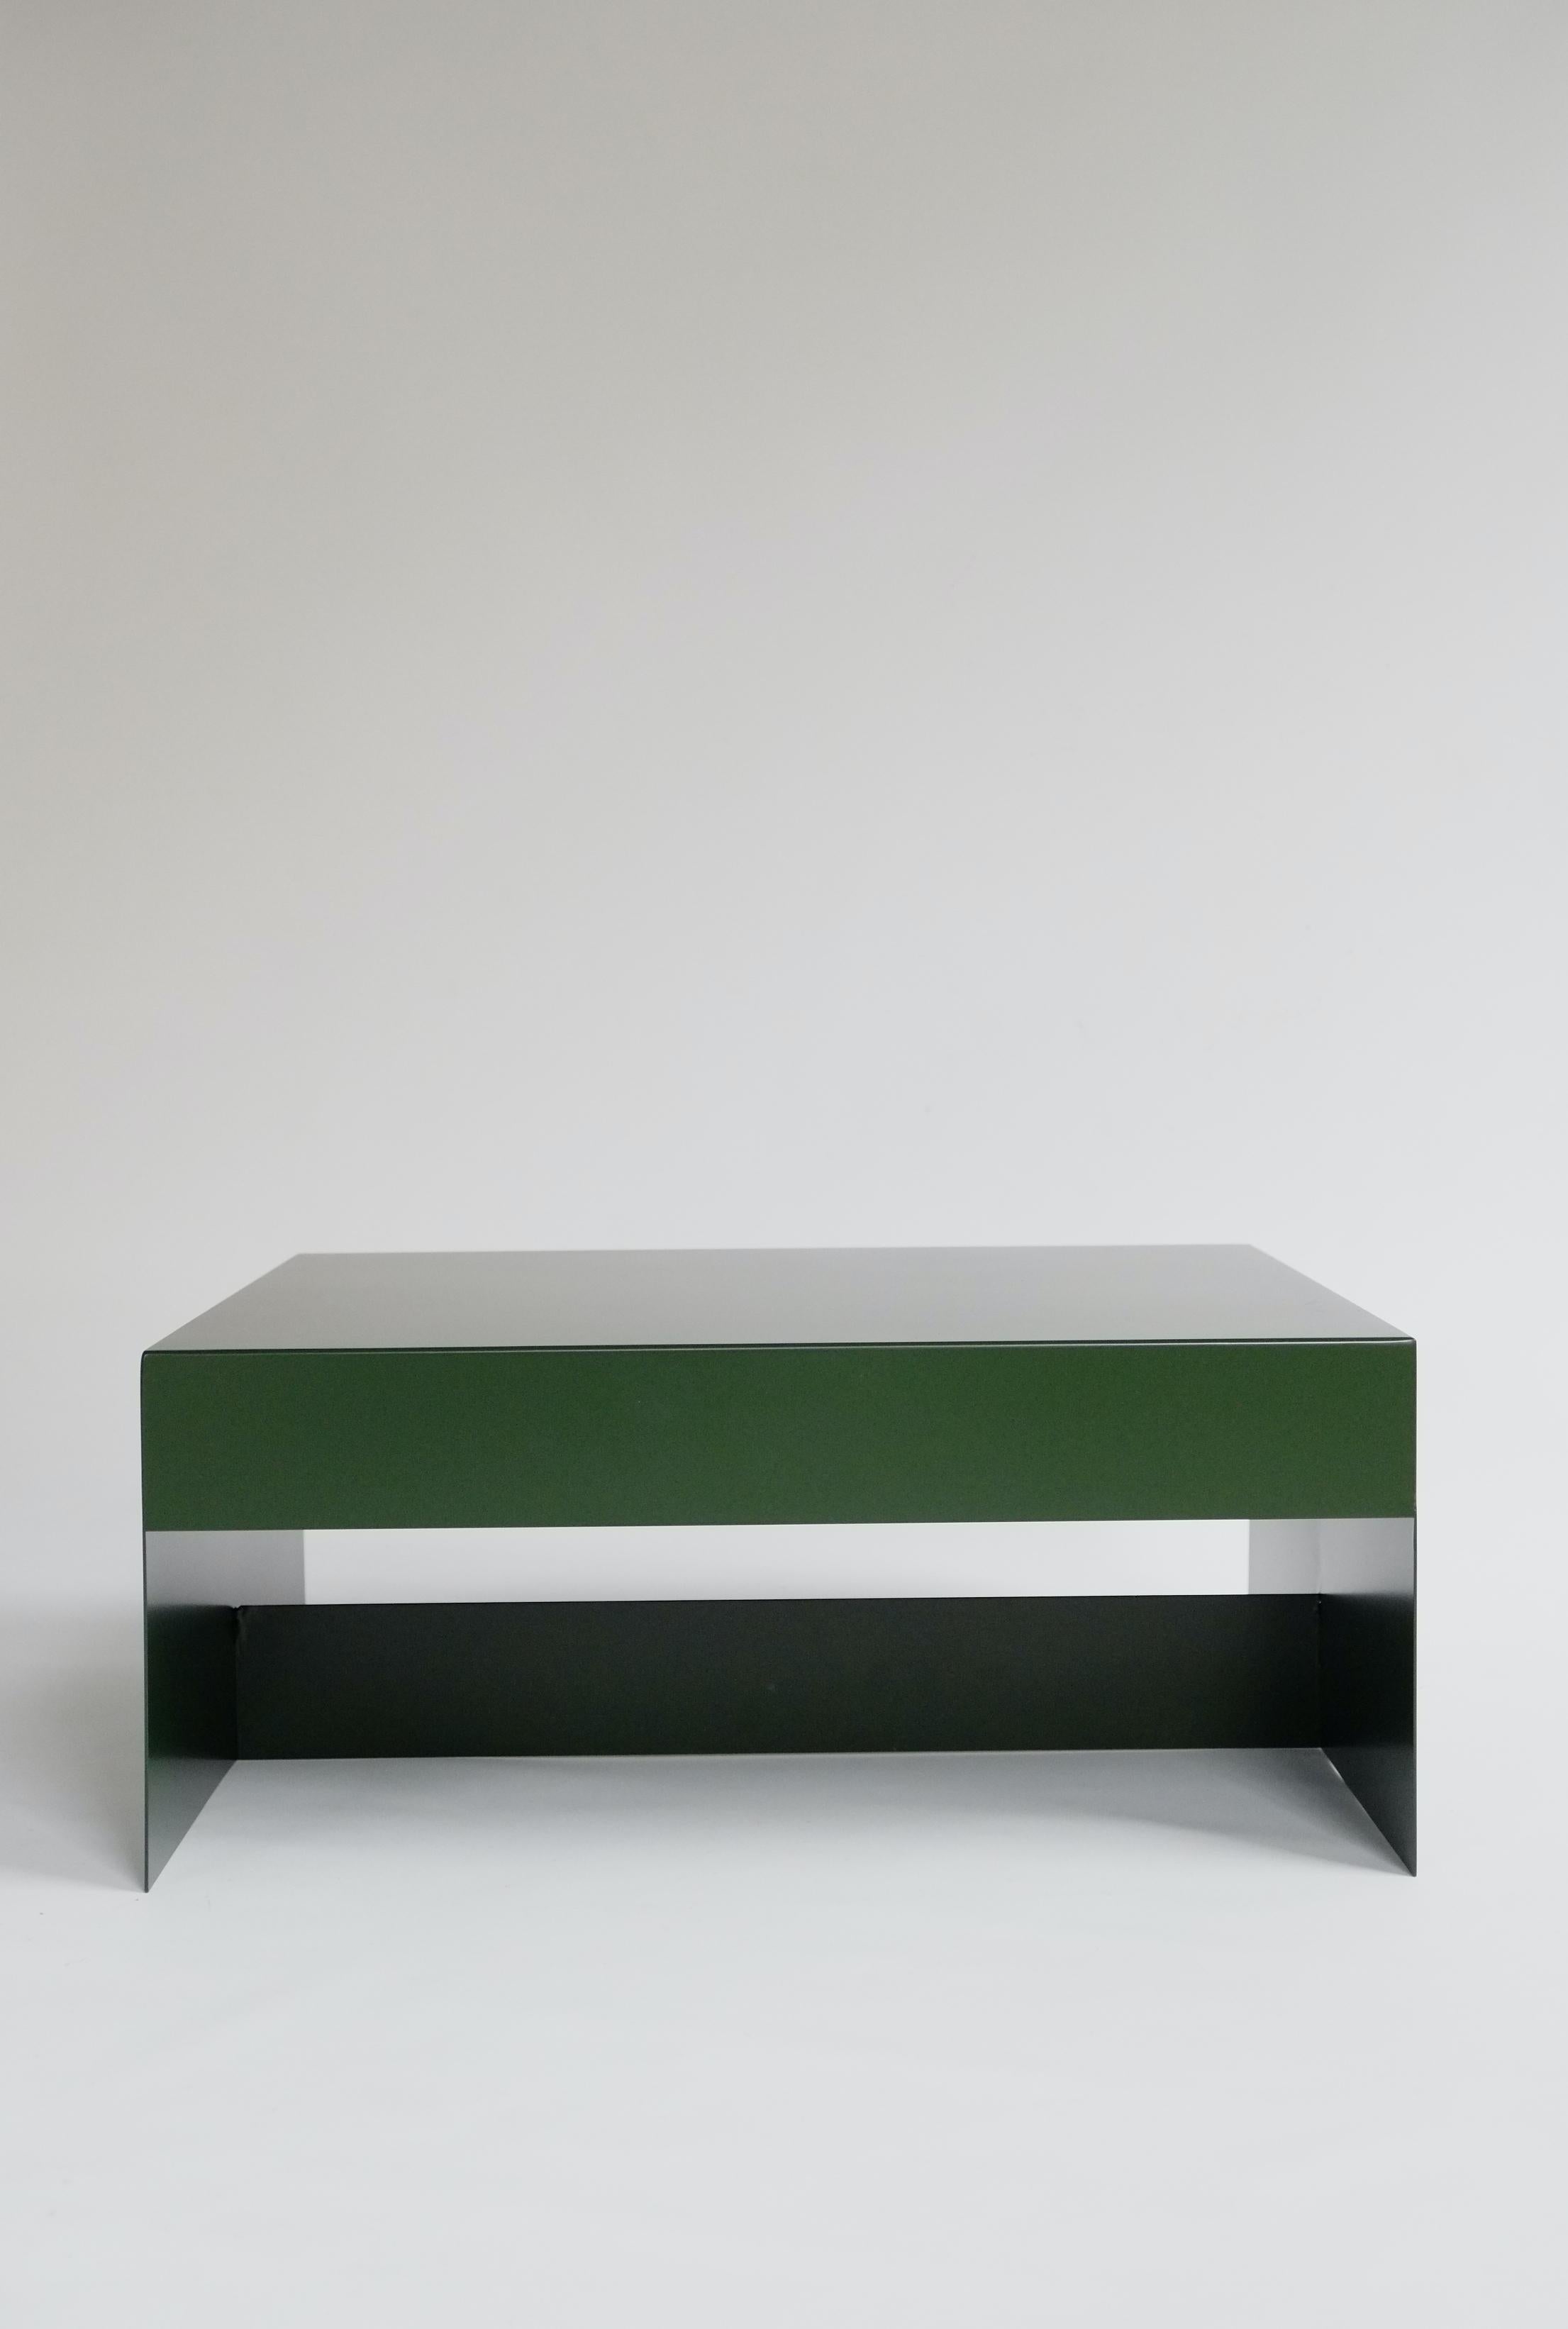 Our latest design - the single form coffee table. An elemental design with a focus on form and function. Made in powder-coated aluminium and available in customisable colours, the single form coffee table is a surprising design which is bold and